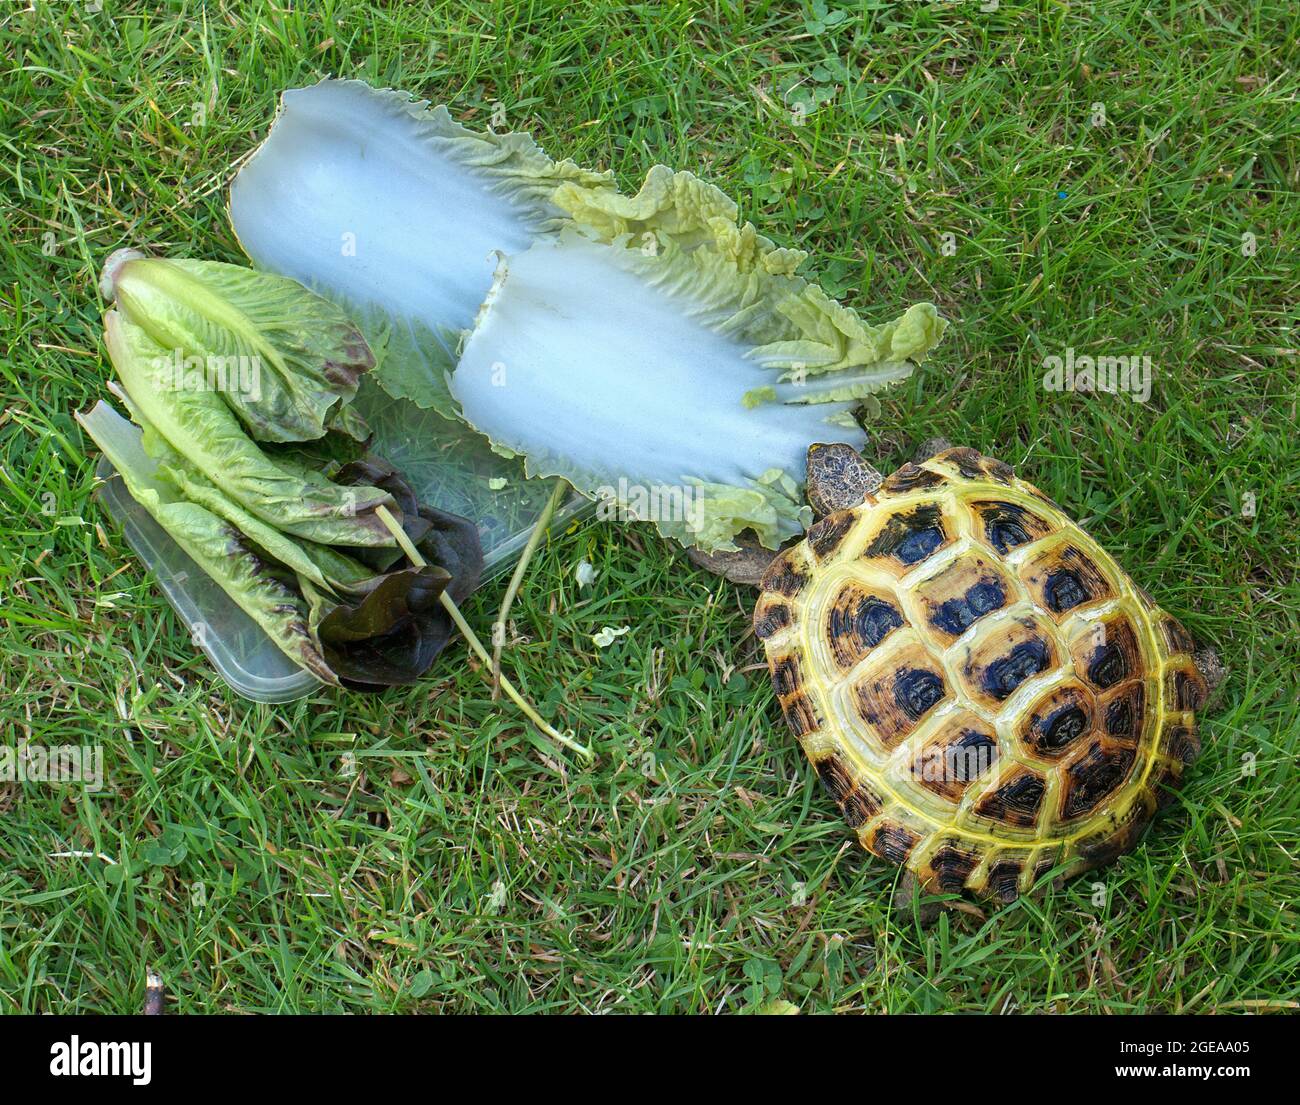 Small tortoise in garden eating Chinese cabbage leaves Stock Photo